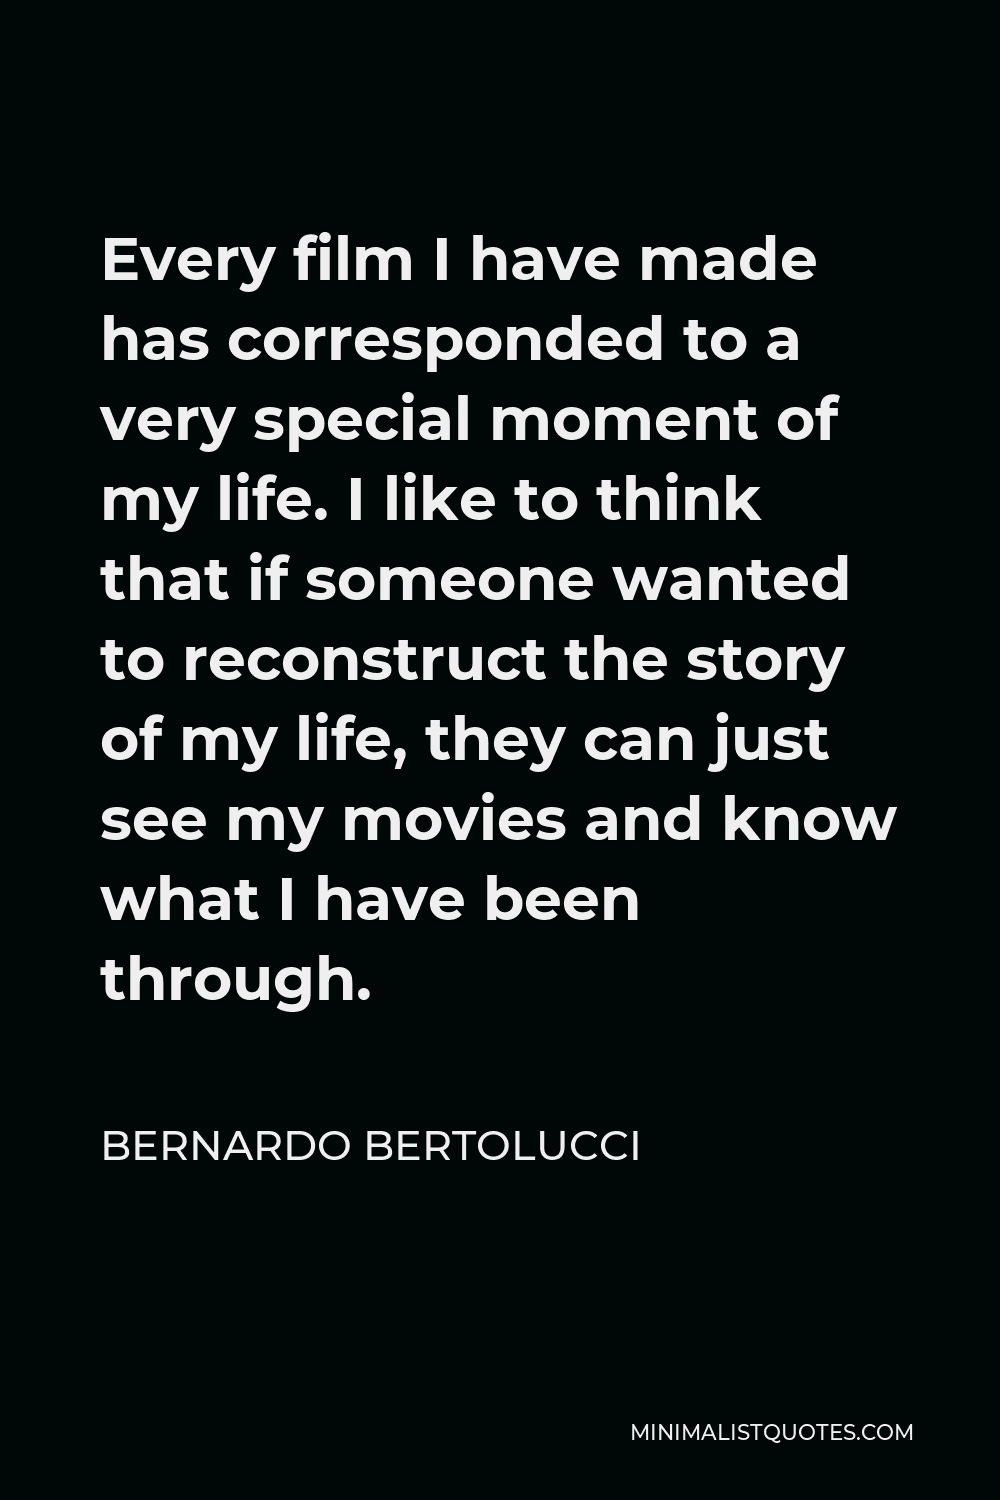 Bernardo Bertolucci Quote - Every film I have made has corresponded to a very special moment of my life. I like to think that if someone wanted to reconstruct the story of my life, they can just see my movies and know what I have been through.